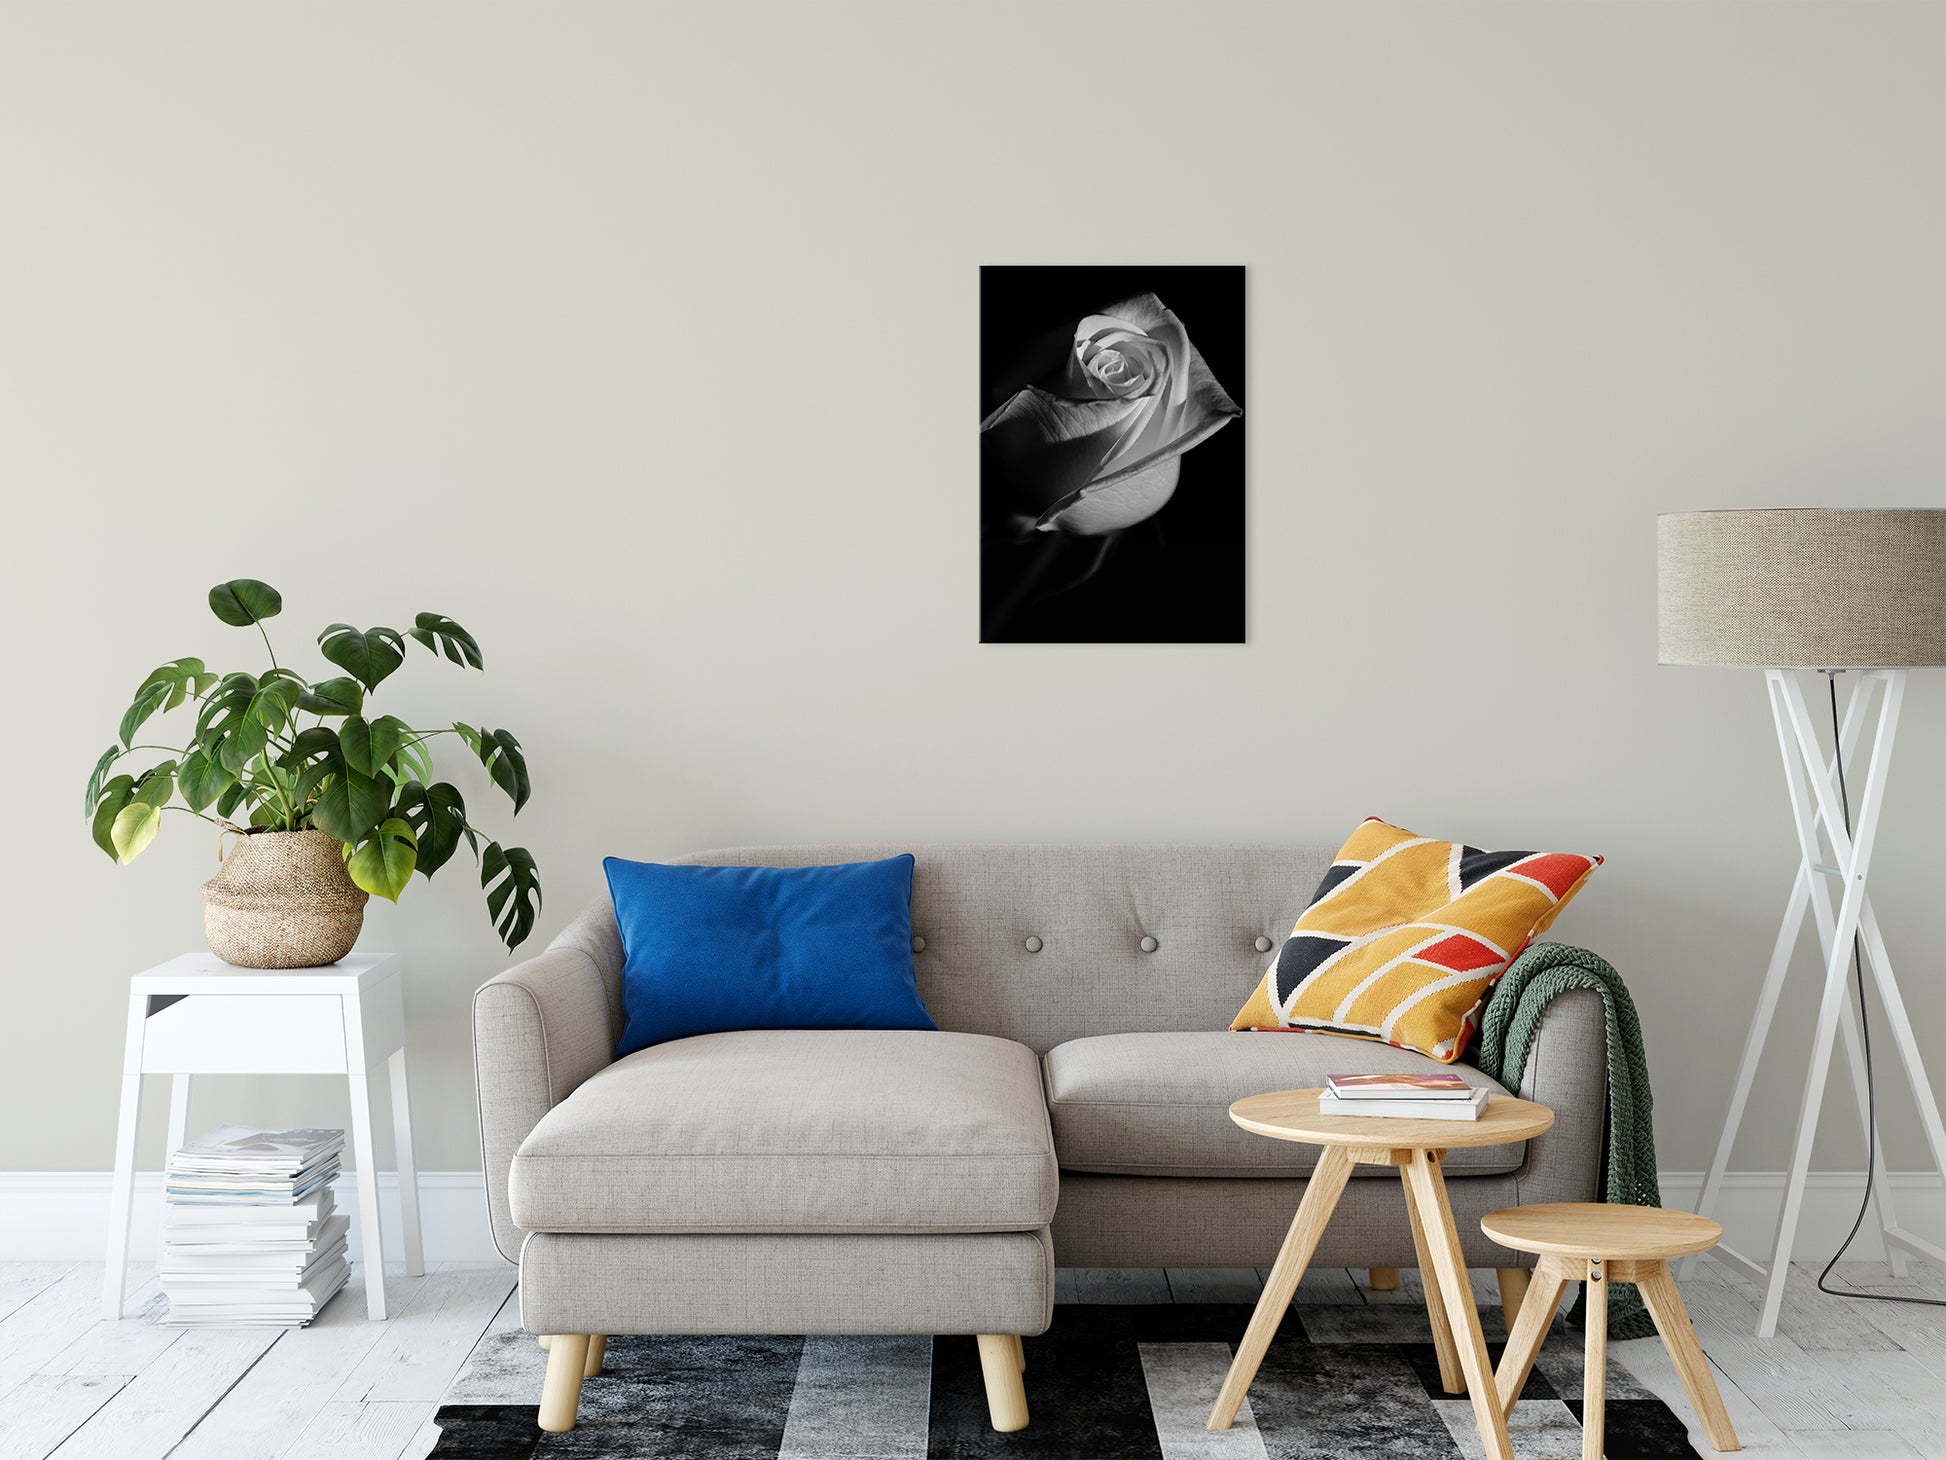 Rose on Black Black & White Nature / Floral Photo Fine Art Canvas Wall Art Prints 20" x 24" - PIPAFINEART